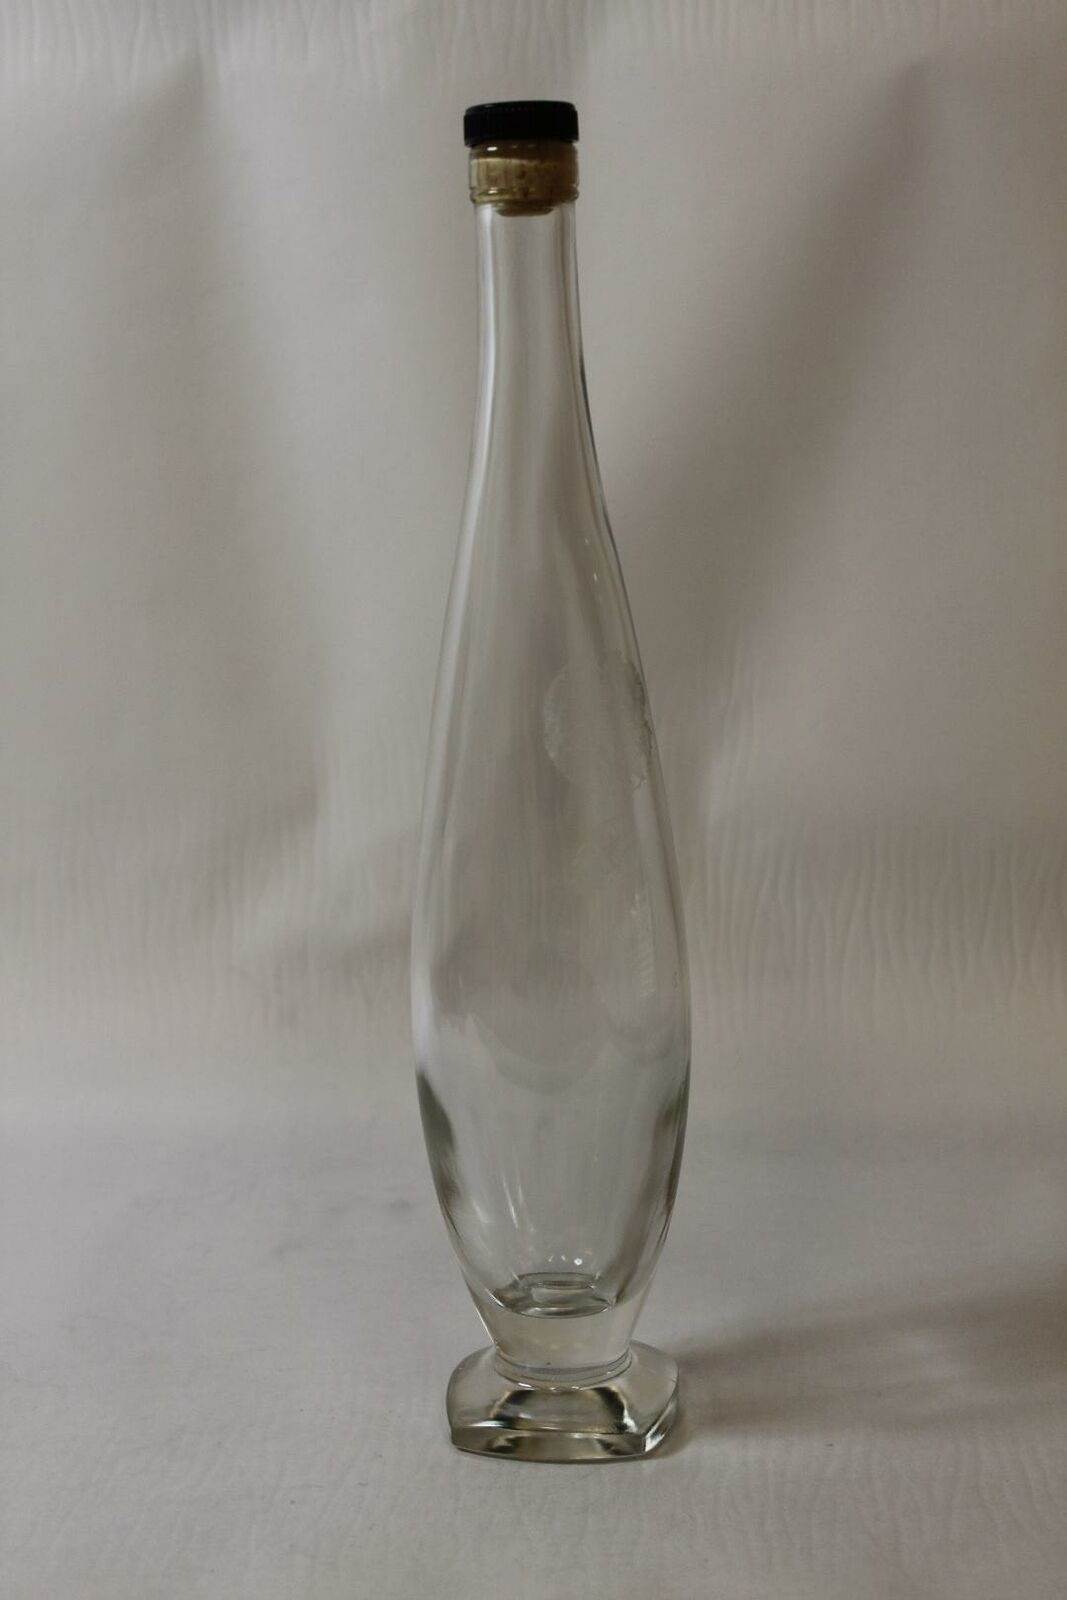 Primary image for Tall Glass Cordial DECANTER Bottle Teardrop Design with Cork Cover